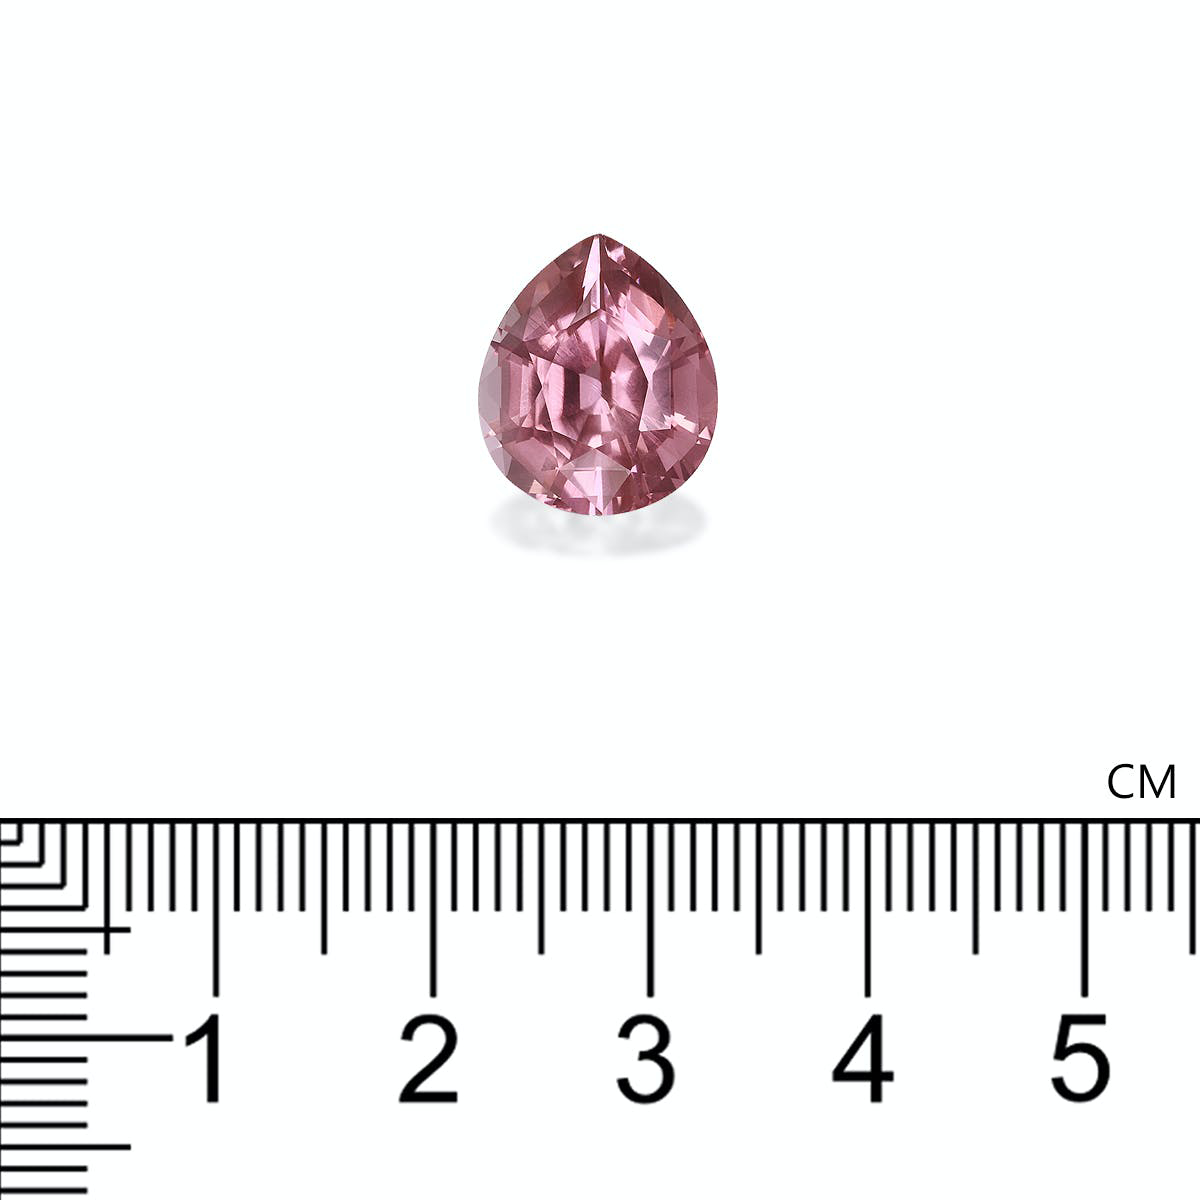 Picture of Flamingo Pink Tourmaline 6.02ct - 13x11mm (PT0685)